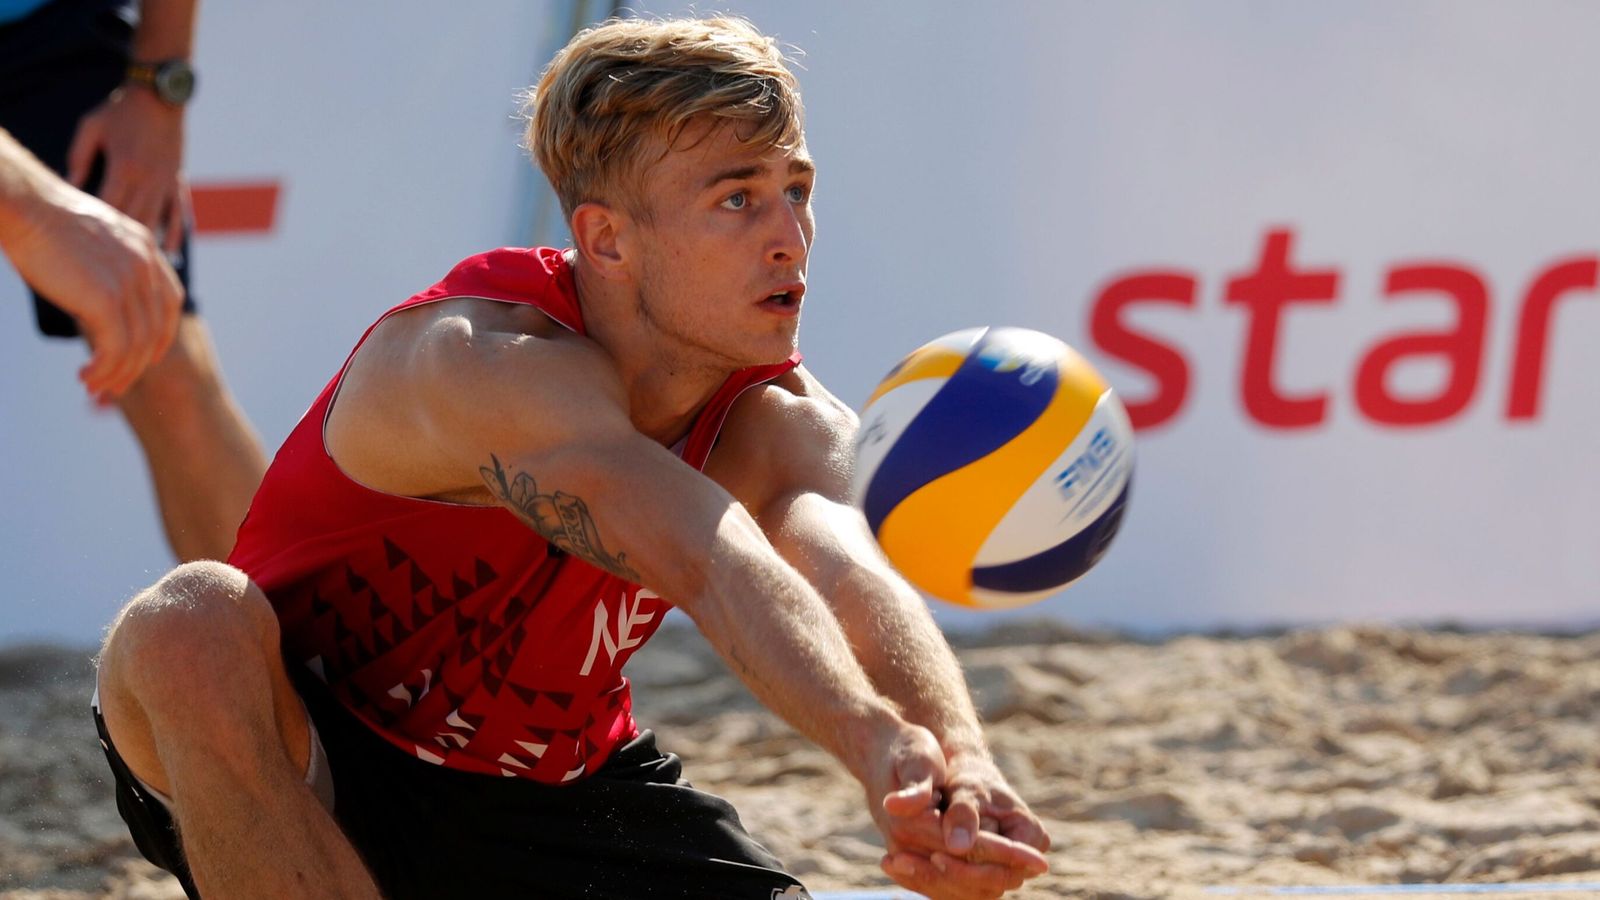 Dutch Olympic bosses defend picking rapist volleyball player who attacked British girl